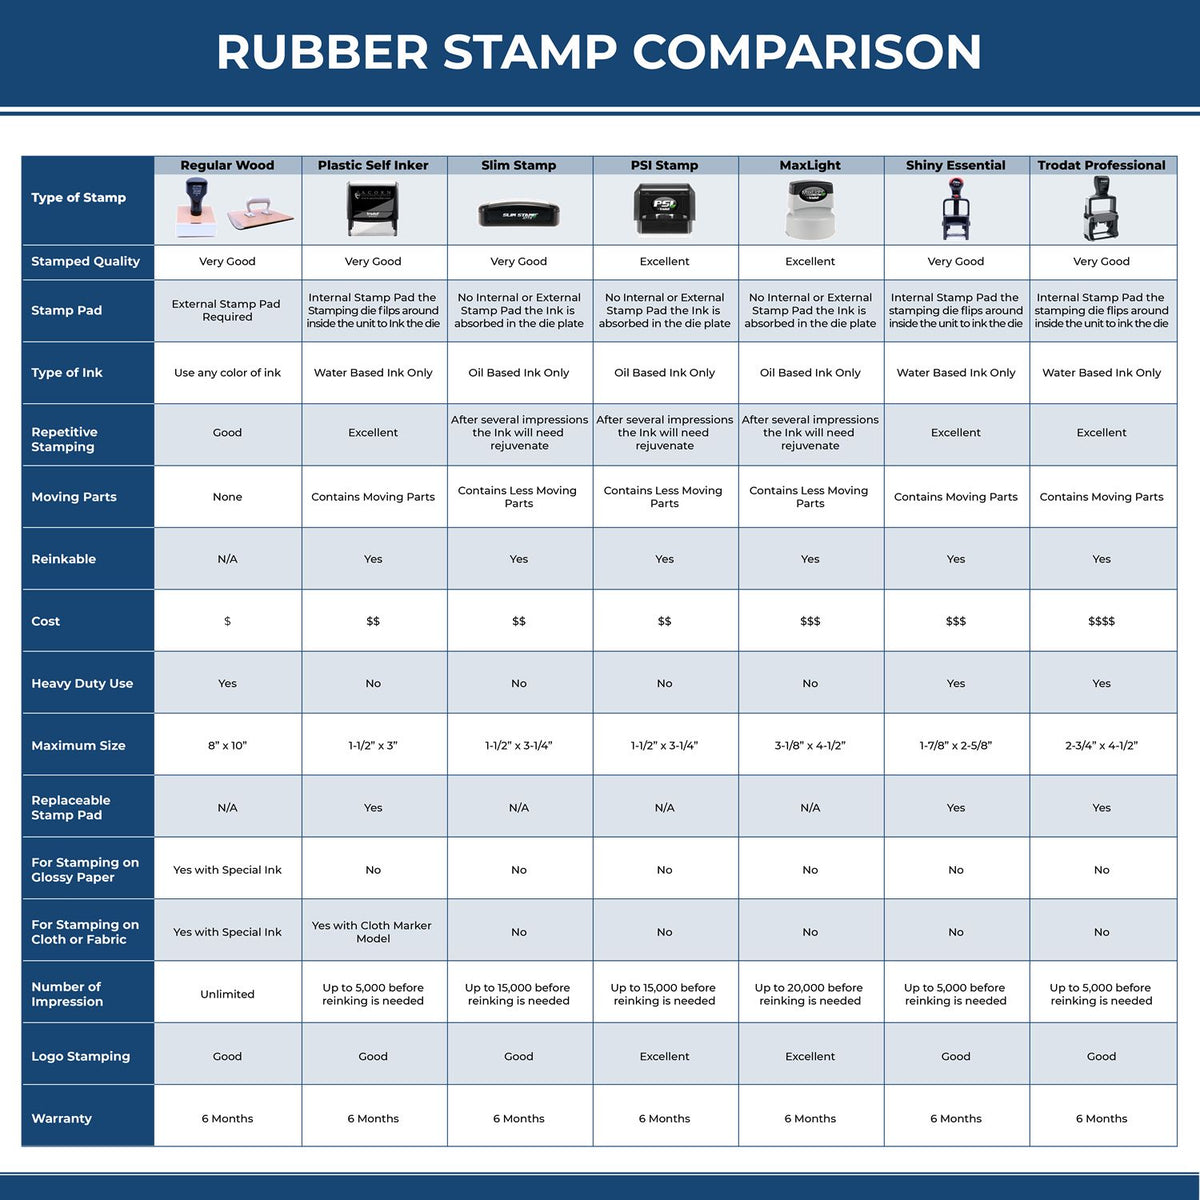 Large File Copy with Folder Rubber Stamp 4867R Rubber Stamp Comparison